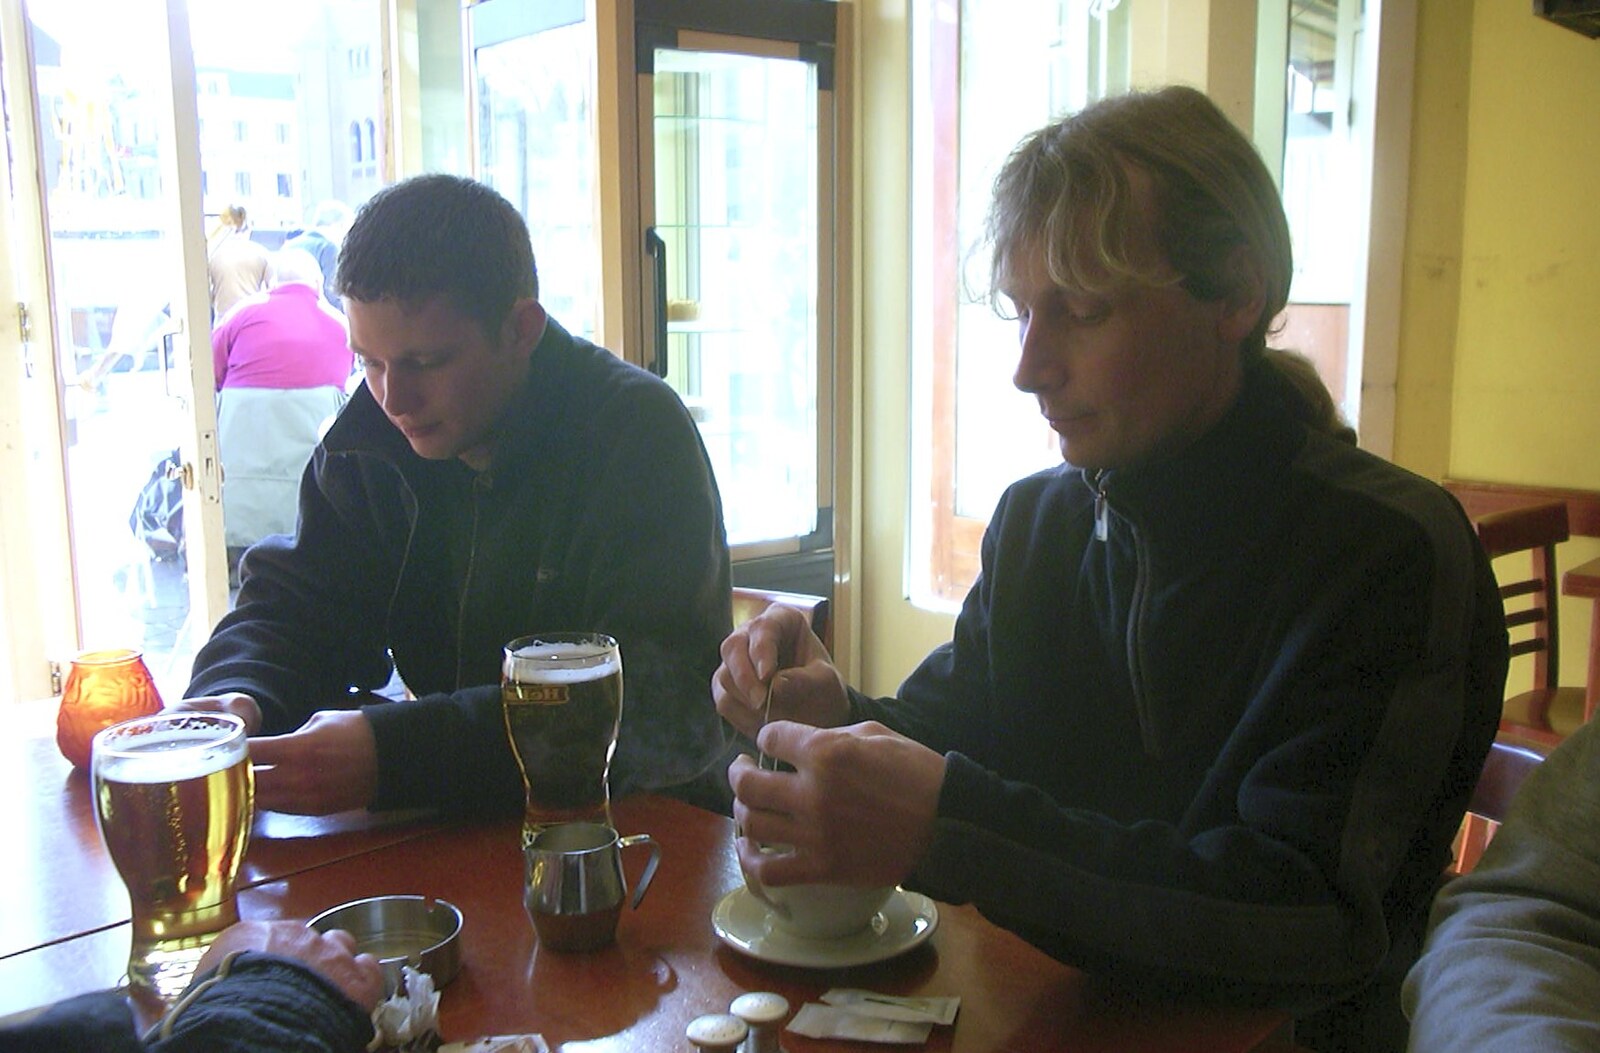 Phil and Jimmy in a bar from Anne Frank, Markets and Mikey-P's Stag Do, Amsterdam, Netherlands - 6th March 2004